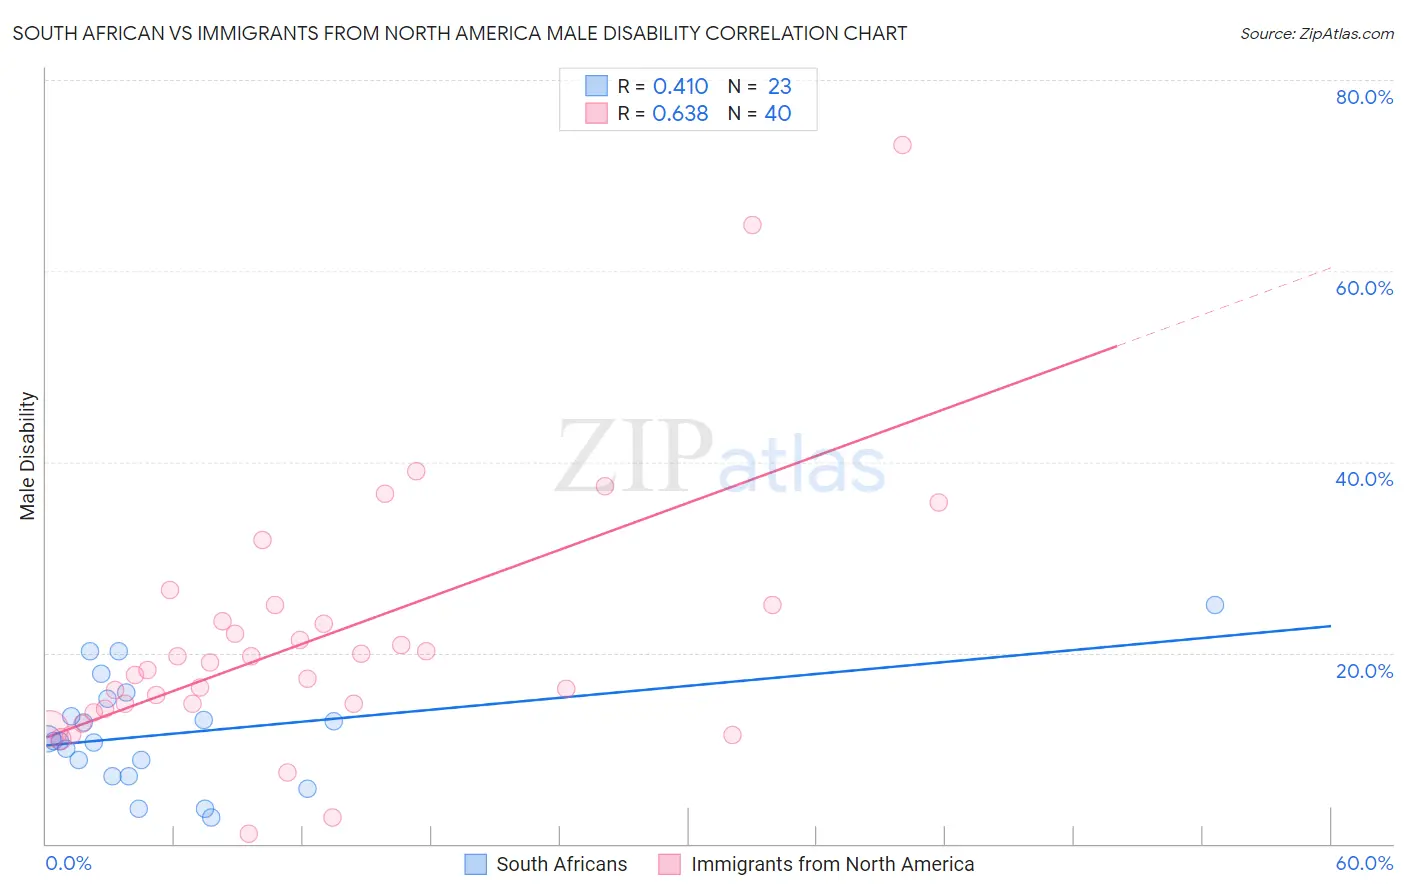 South African vs Immigrants from North America Male Disability